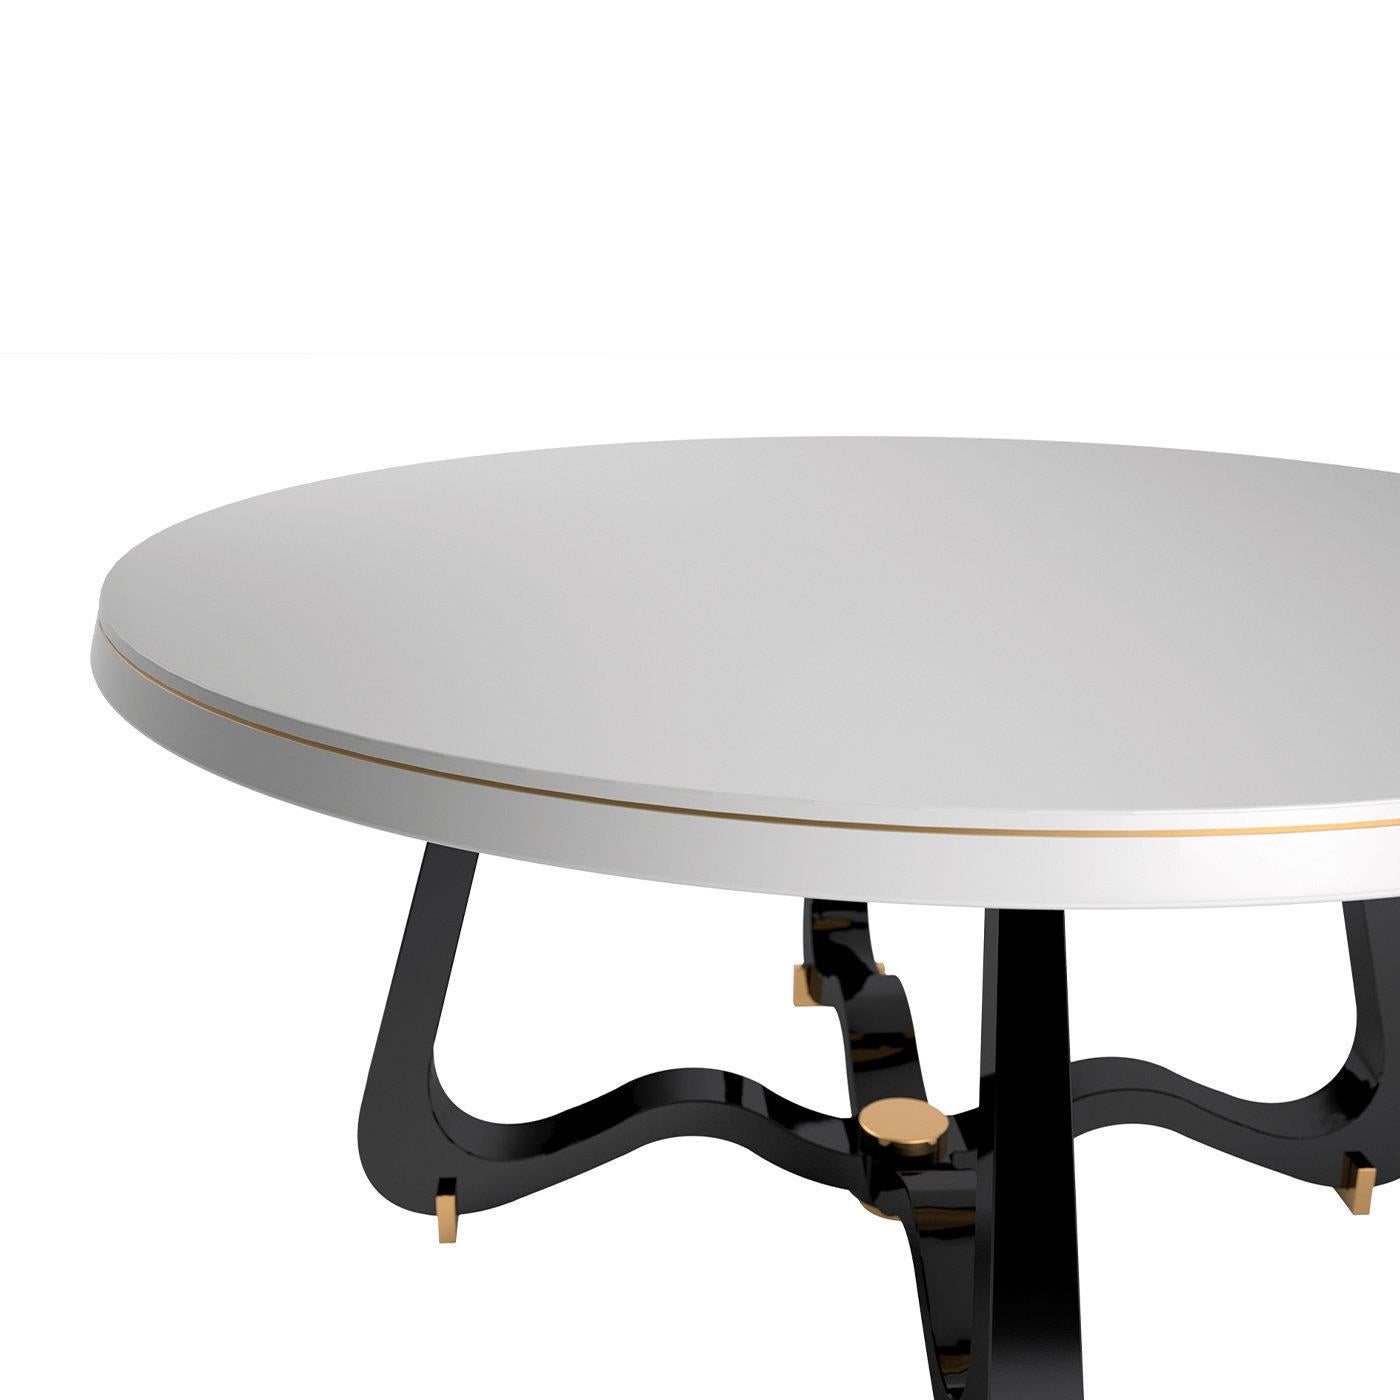 An exquisite combination of black and white polished hues enhanced with shiny brass details, this magnificent dining table will make a bold and stately addition to a refined contemporary interior. Designed by Giannella Ventura, it is fashioned of